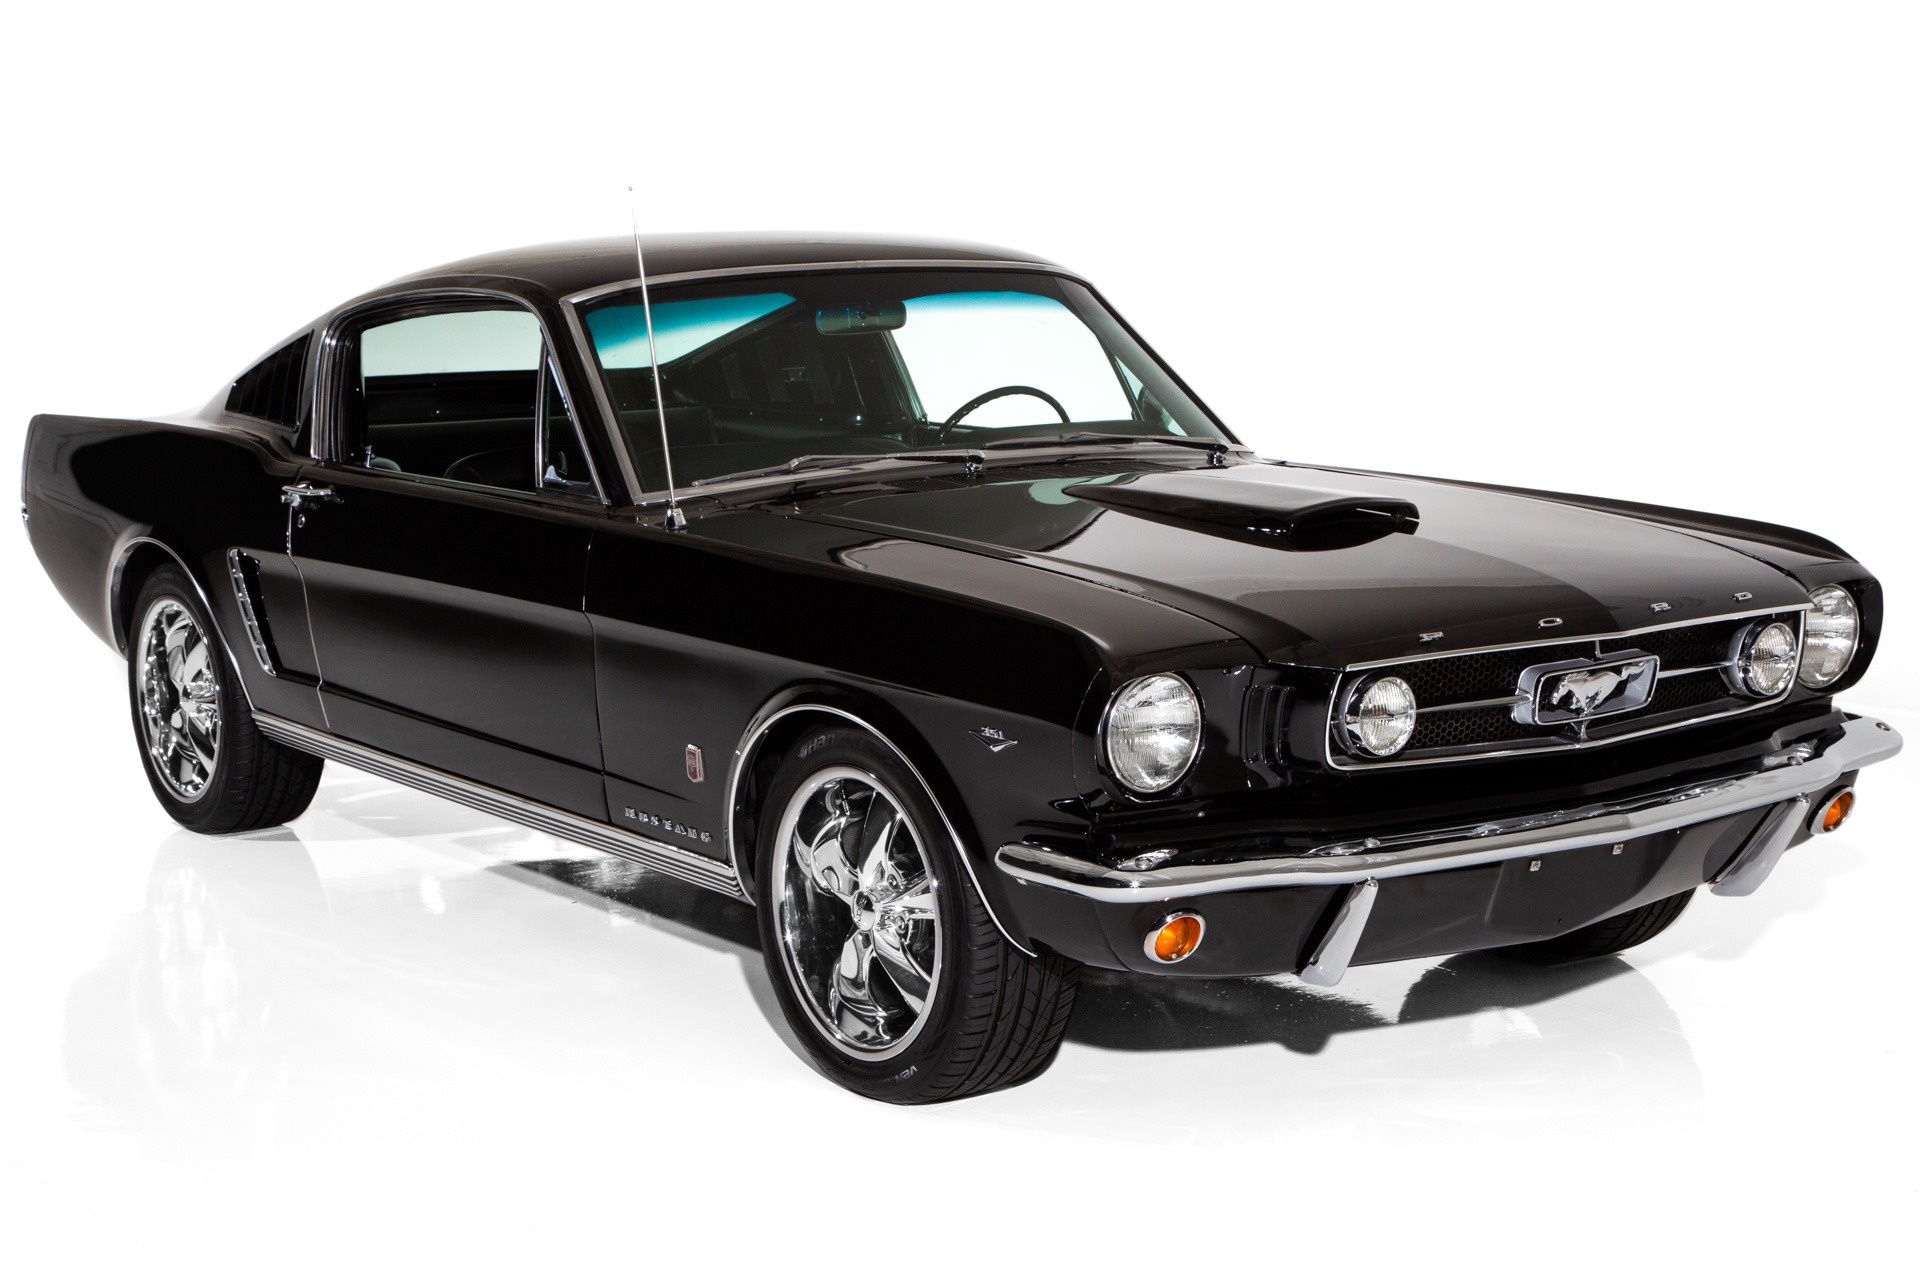 For Sale Used 1965 Ford Mustang Black/Black 351ci  5-Speed | American Dream Machines Des Moines IA 50309